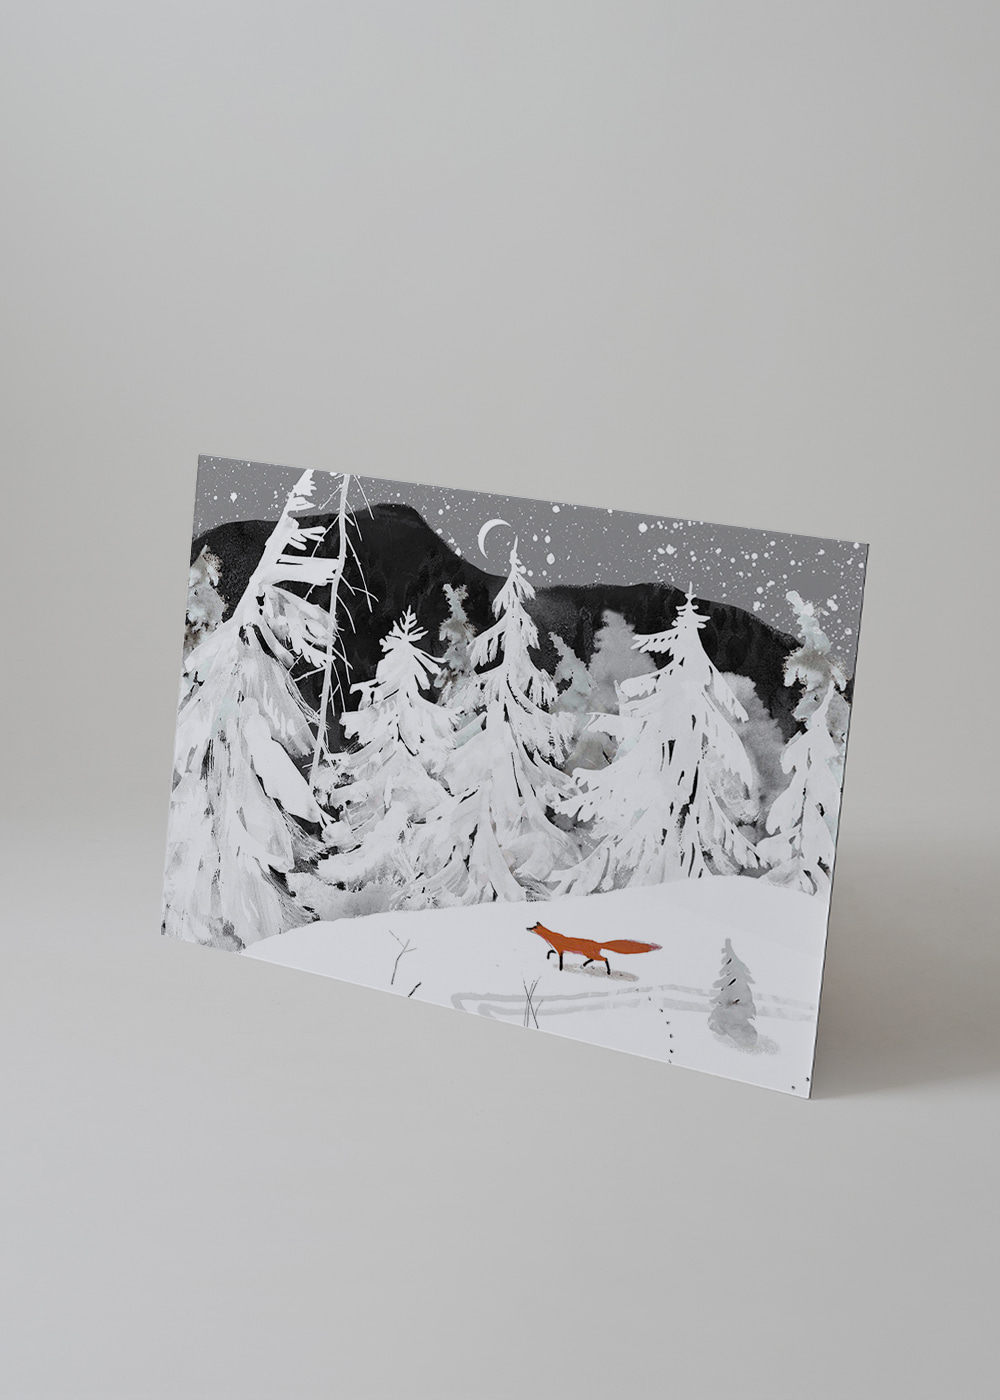 A Fox in a Snowy Forest